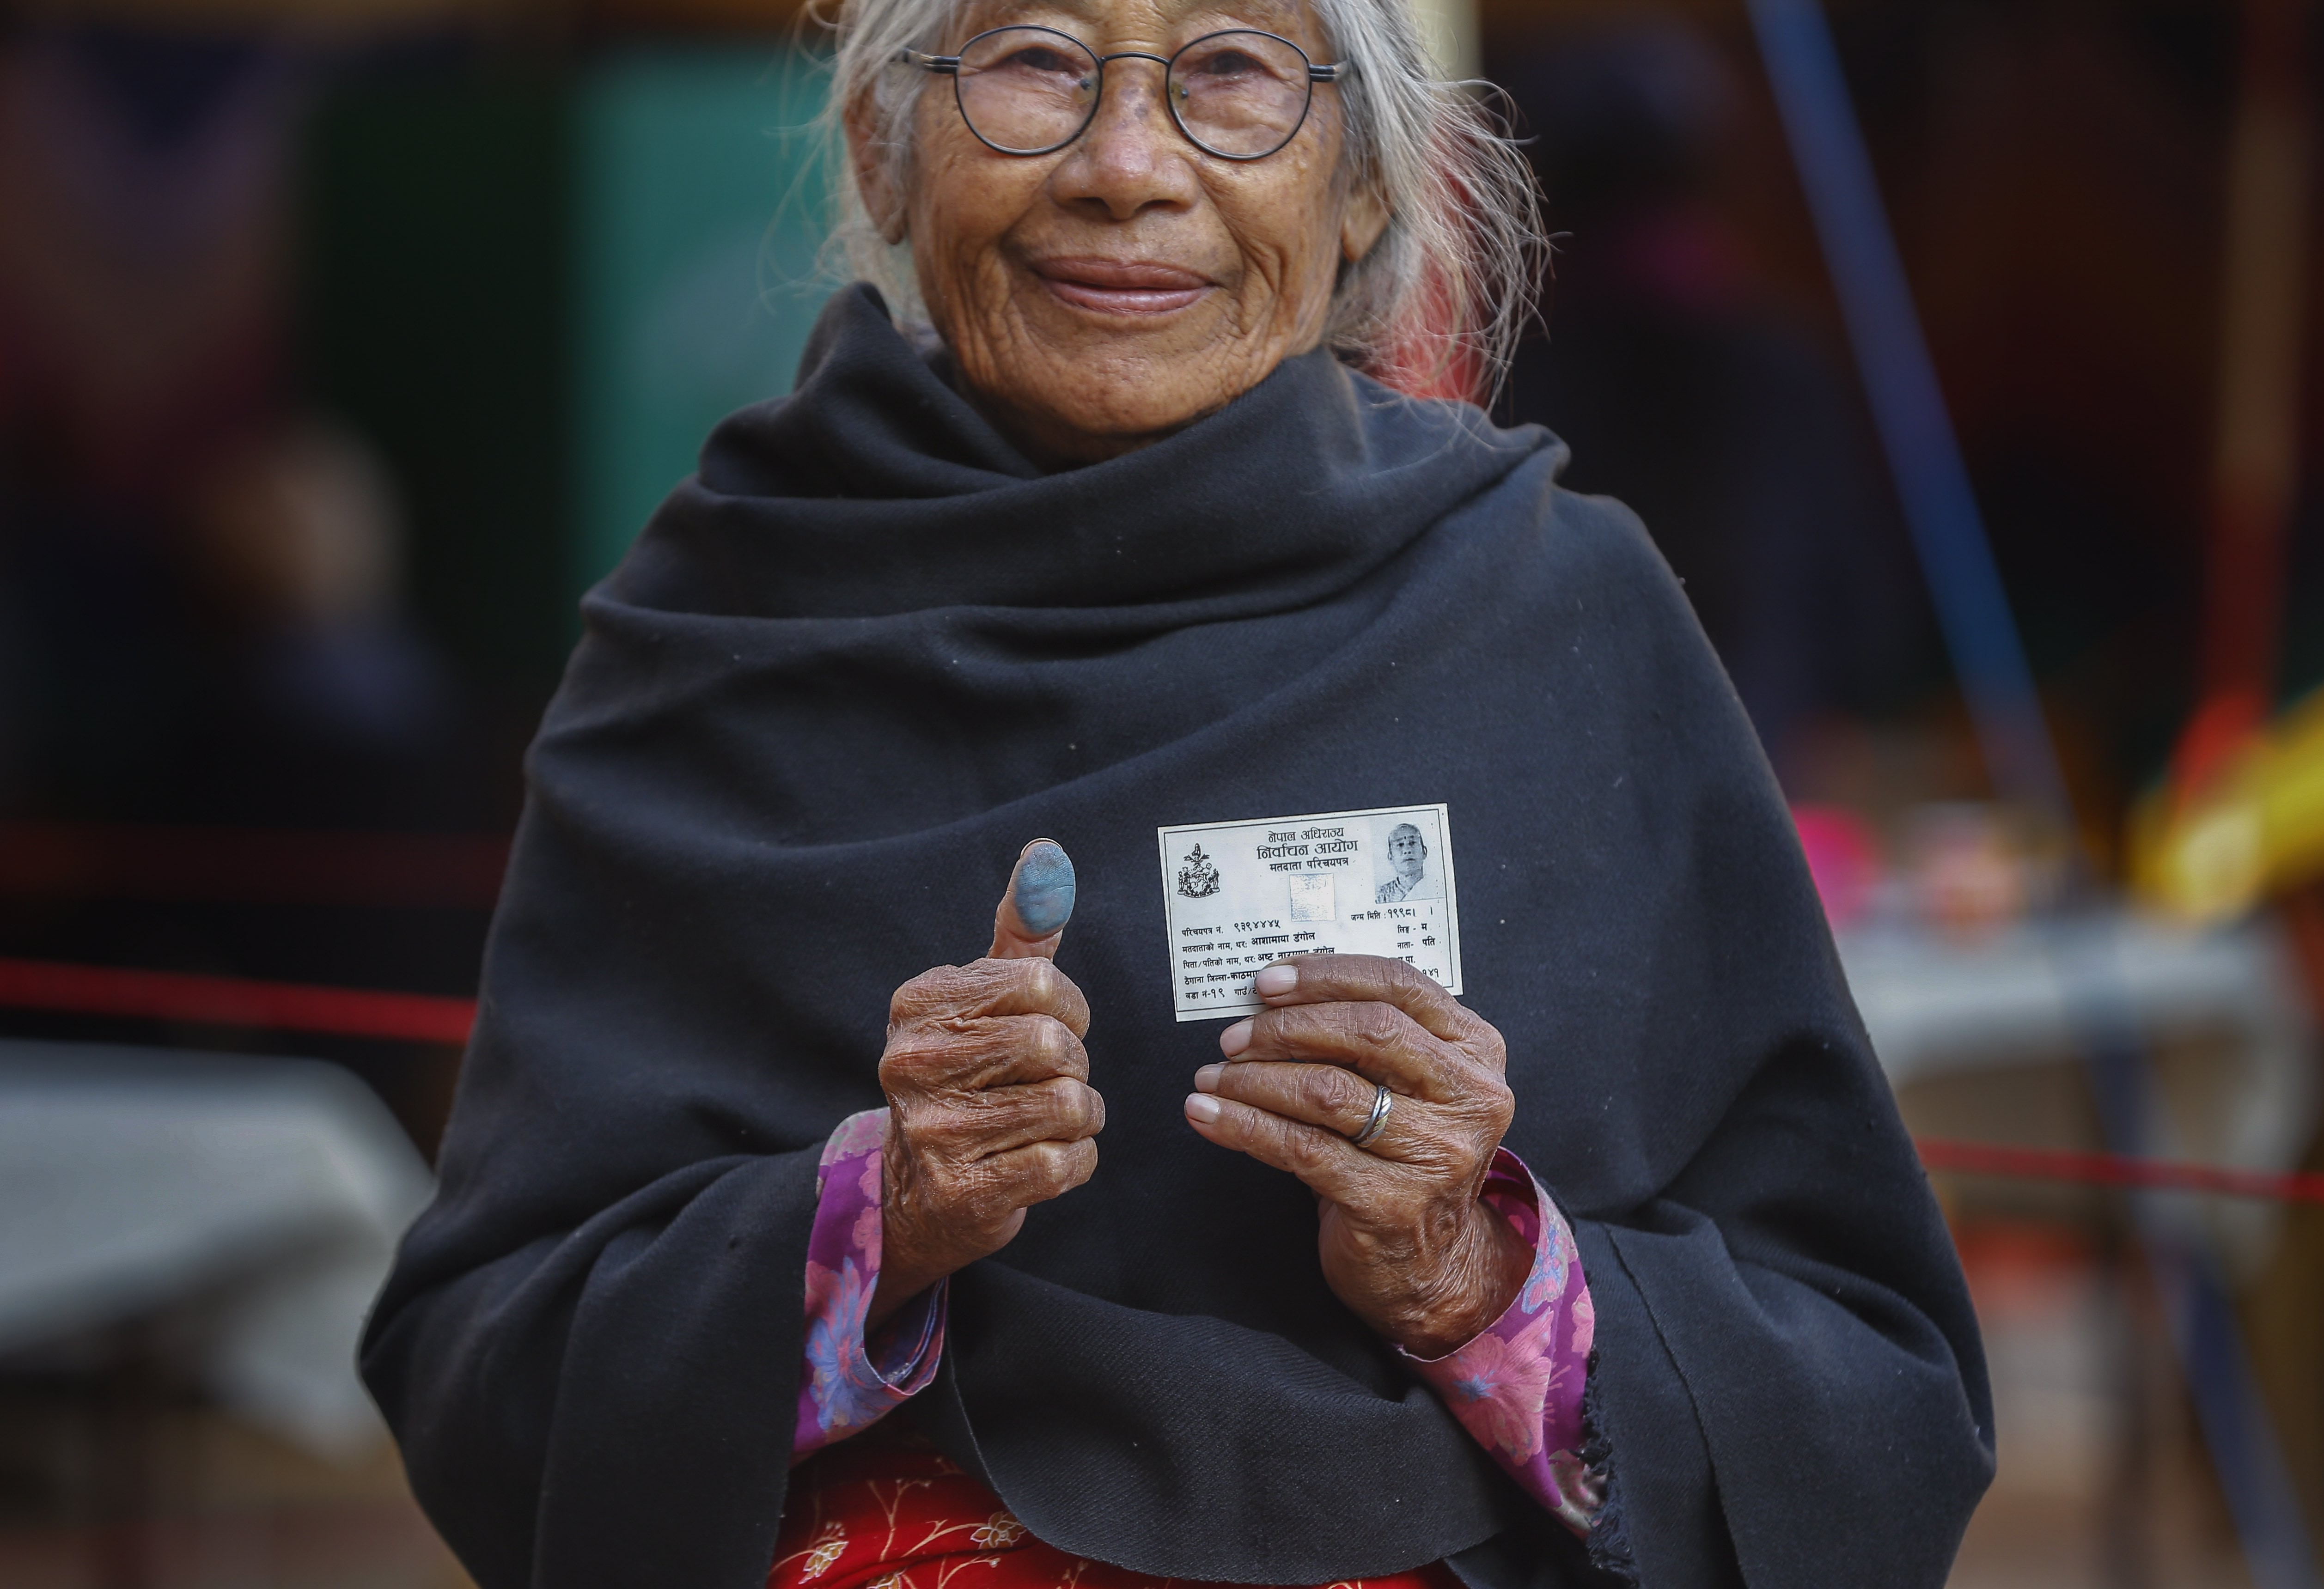 Asha Maya Dangol, 80, shows her thumb print after casting her vote in Kathmandu, in the elections on December 7. Nepal's leftist alliance prevailed in the elections. After two decades of conflict and political stability, Nepalis hope the alliance can deliver stable governance and economic development. Photo: EPA-EFE